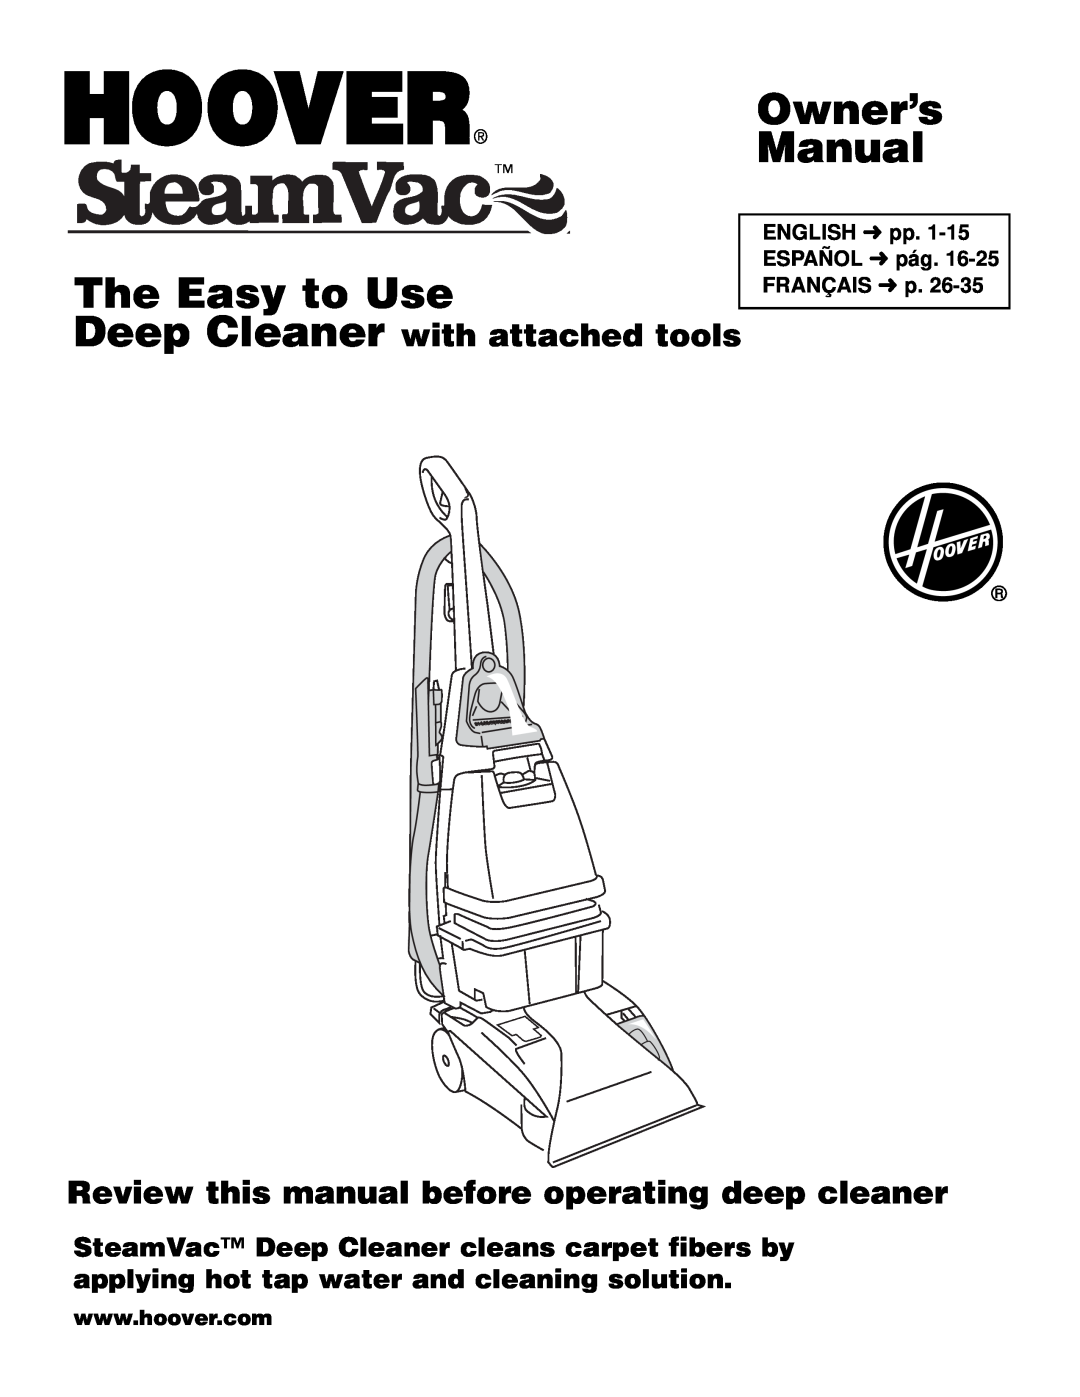 Hoover F5906900 owner manual Owner’s Manual, The Easy to Use, Deep Cleaner with attached tools 